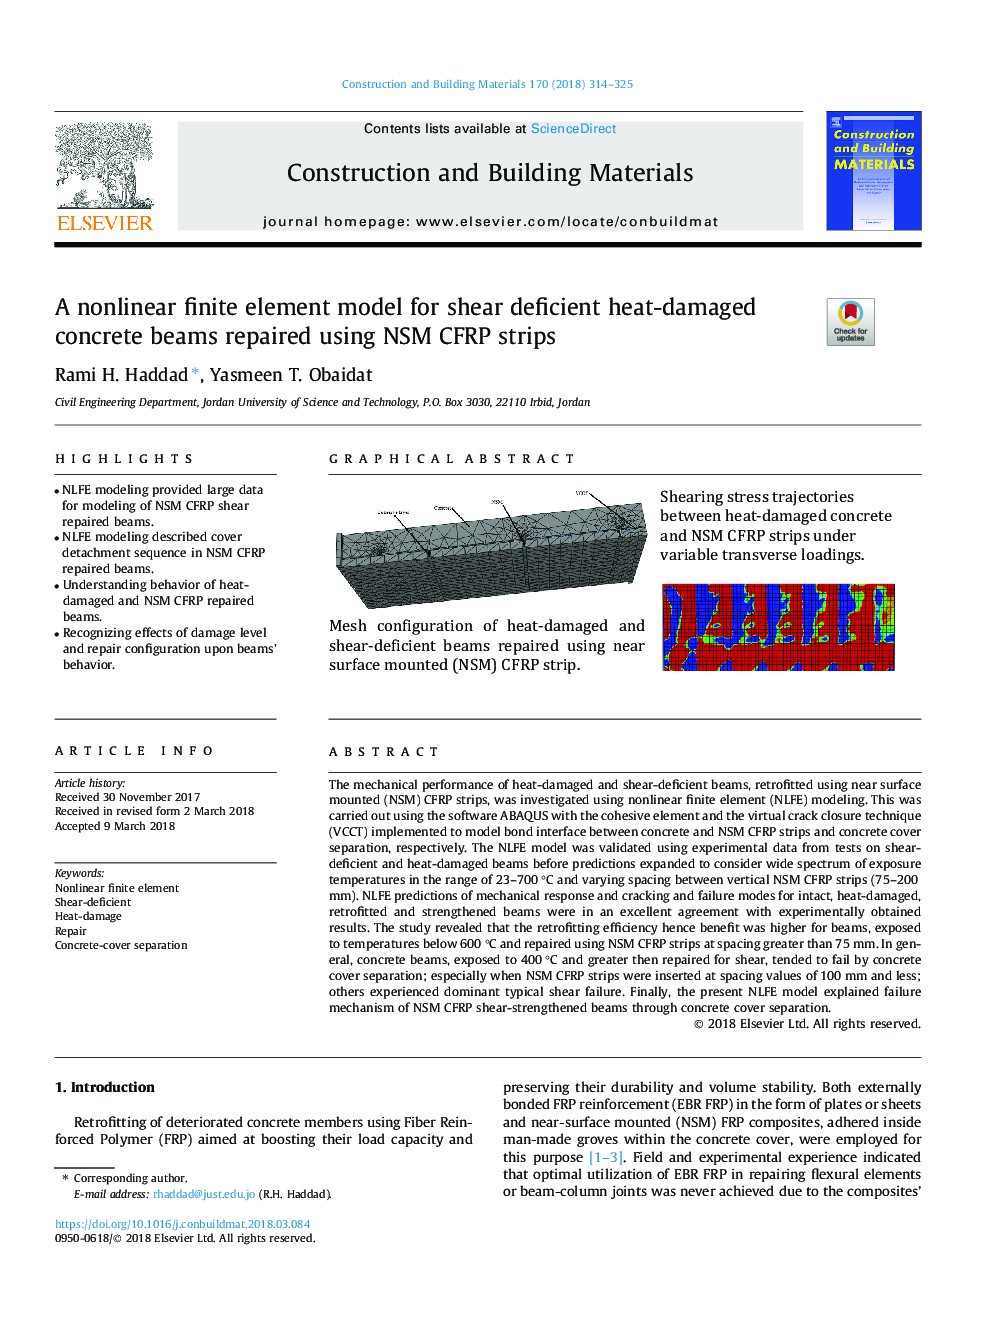 A nonlinear finite element model for shear deficient heat-damaged concrete beams repaired using NSM CFRP strips